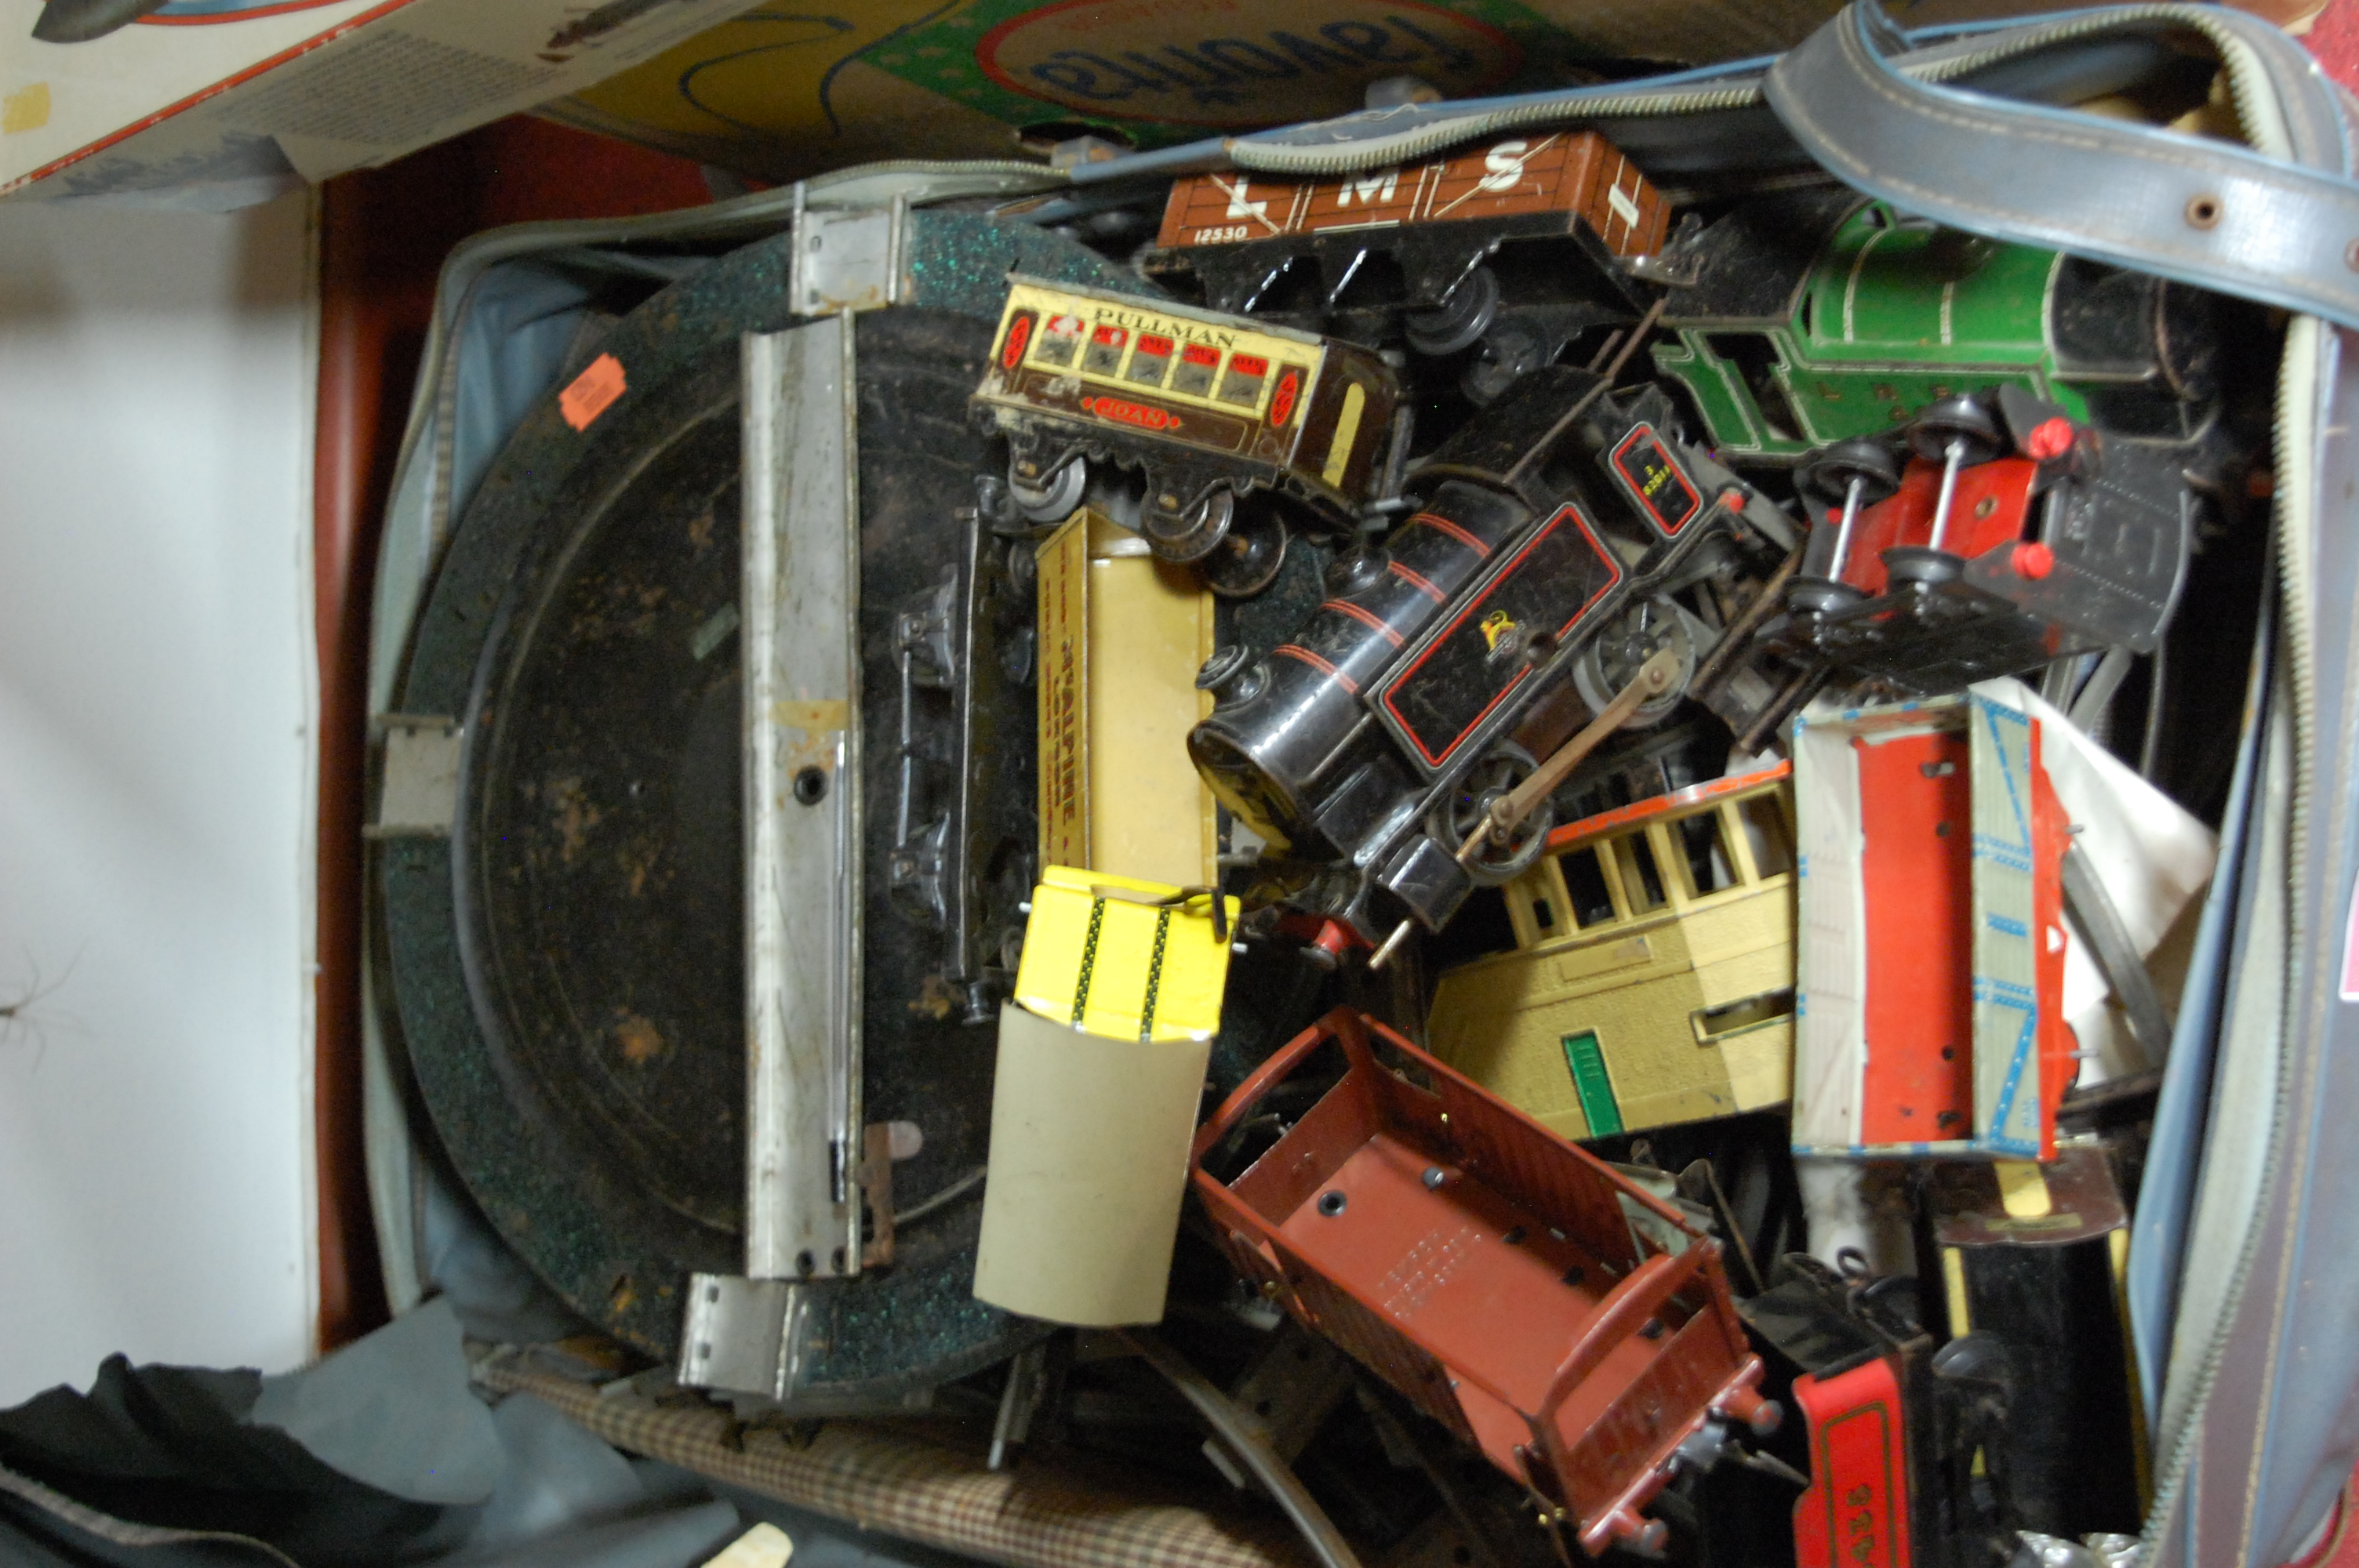 A Hornby tinplate 0 gauge locomotive and various other tinplate locos,